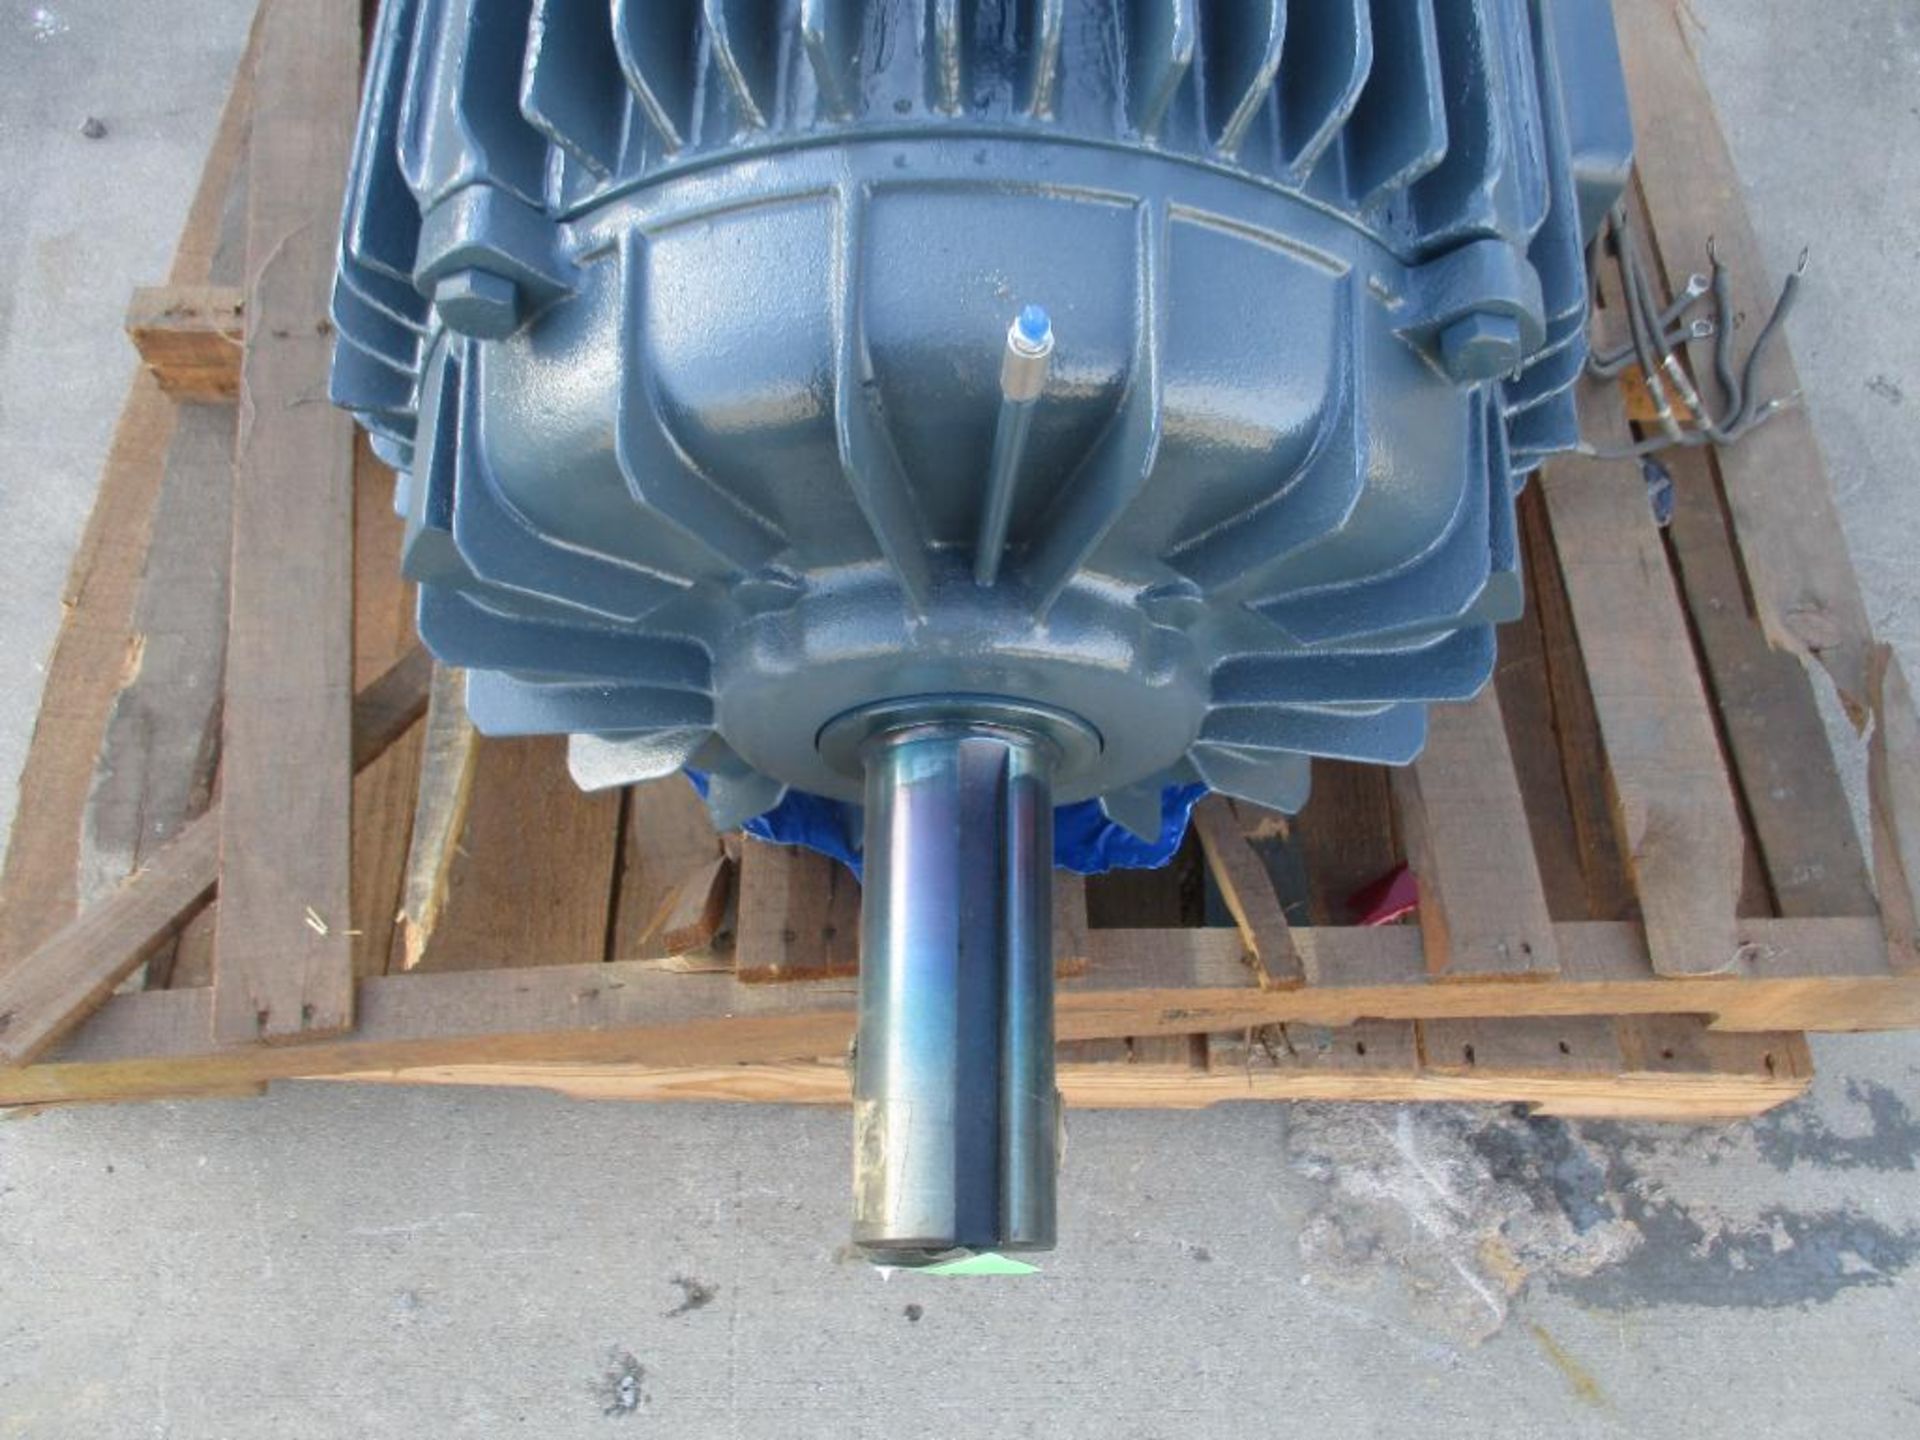 MAGNETEK 3 PHASE 125HP 1770RPM 444T FRAME A/C MOTOR P/N N/A 1622# LBS (THIS LOT IS FOB KNOXVILLE TN) - Image 5 of 5